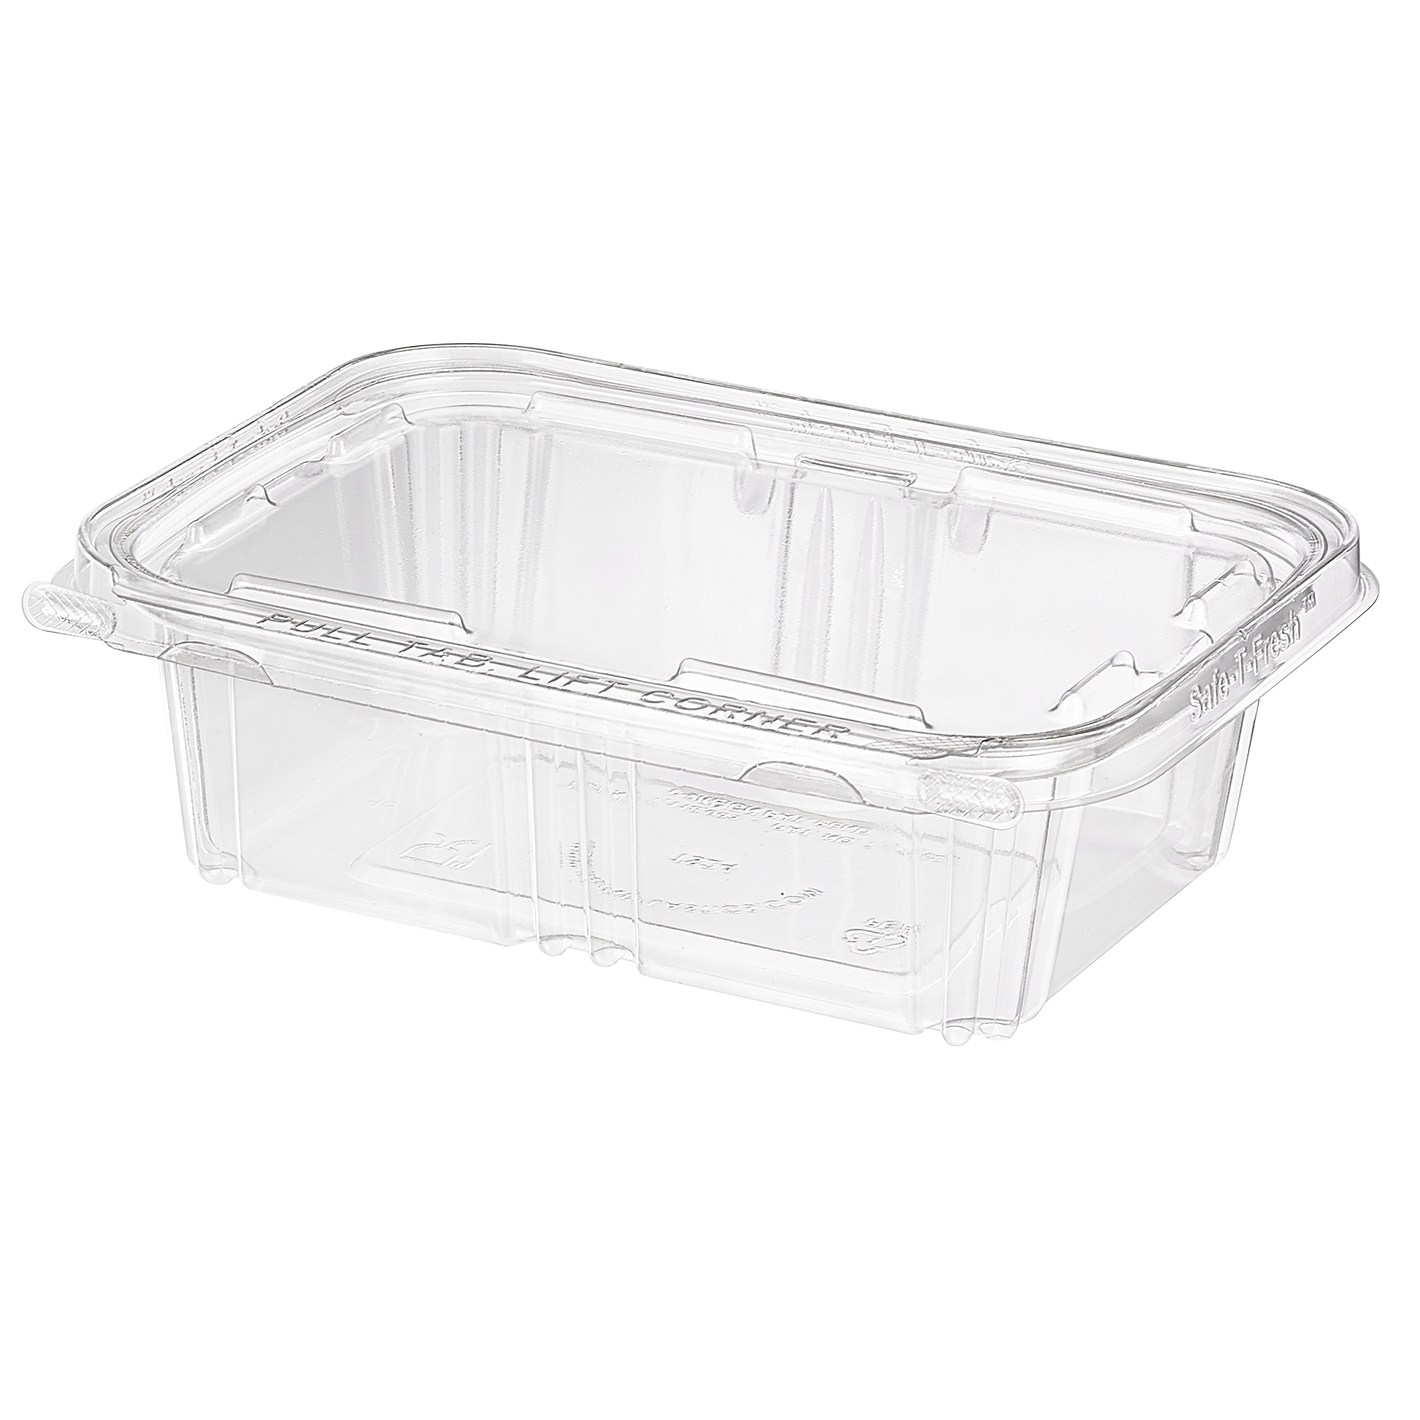 TS24 24 OZ. TAMPER EVIDENT
CONTAINER INLINE 200/CASE